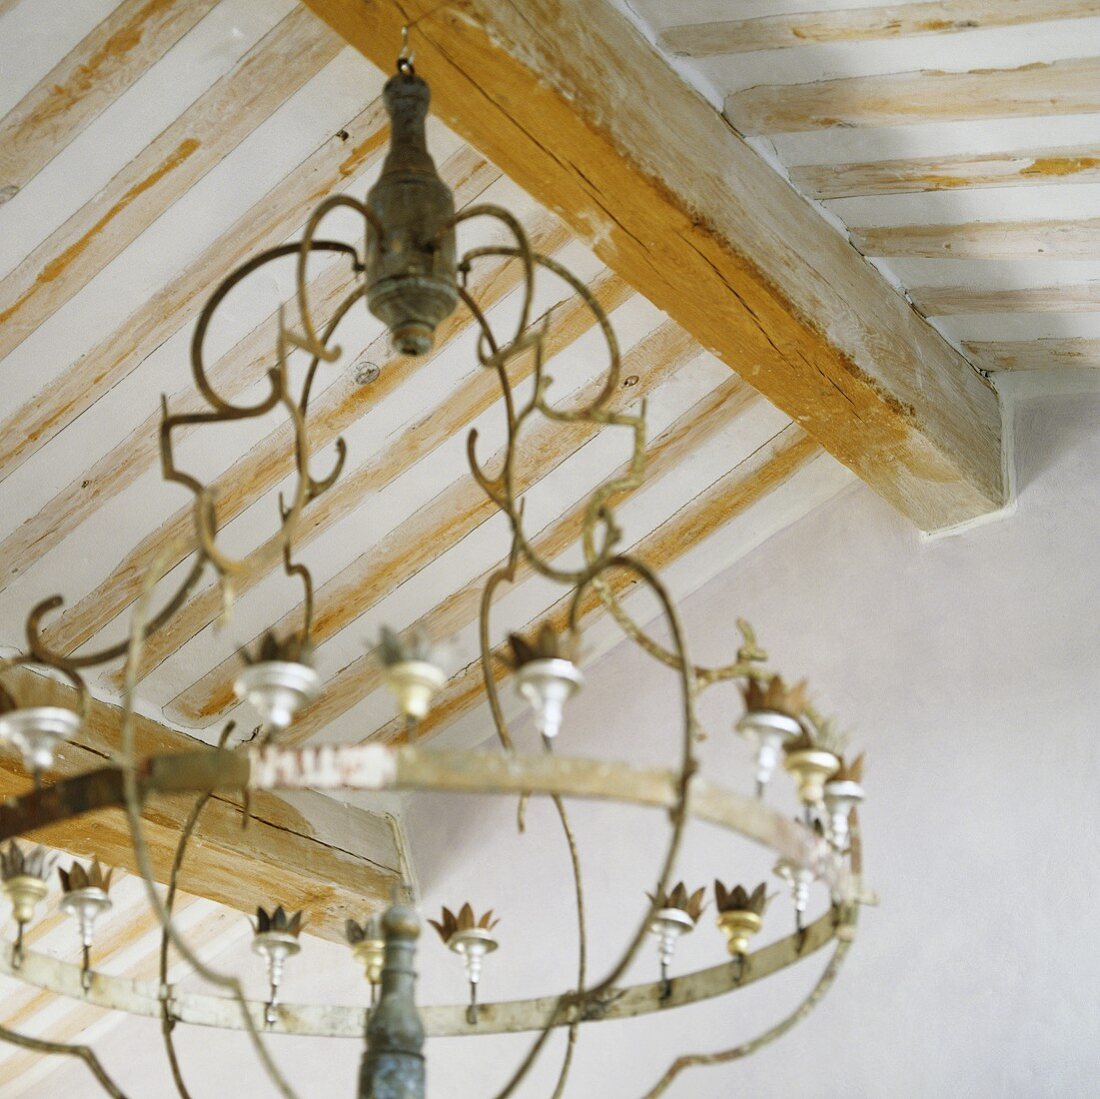 A wood beamed ceiling with a chandelier